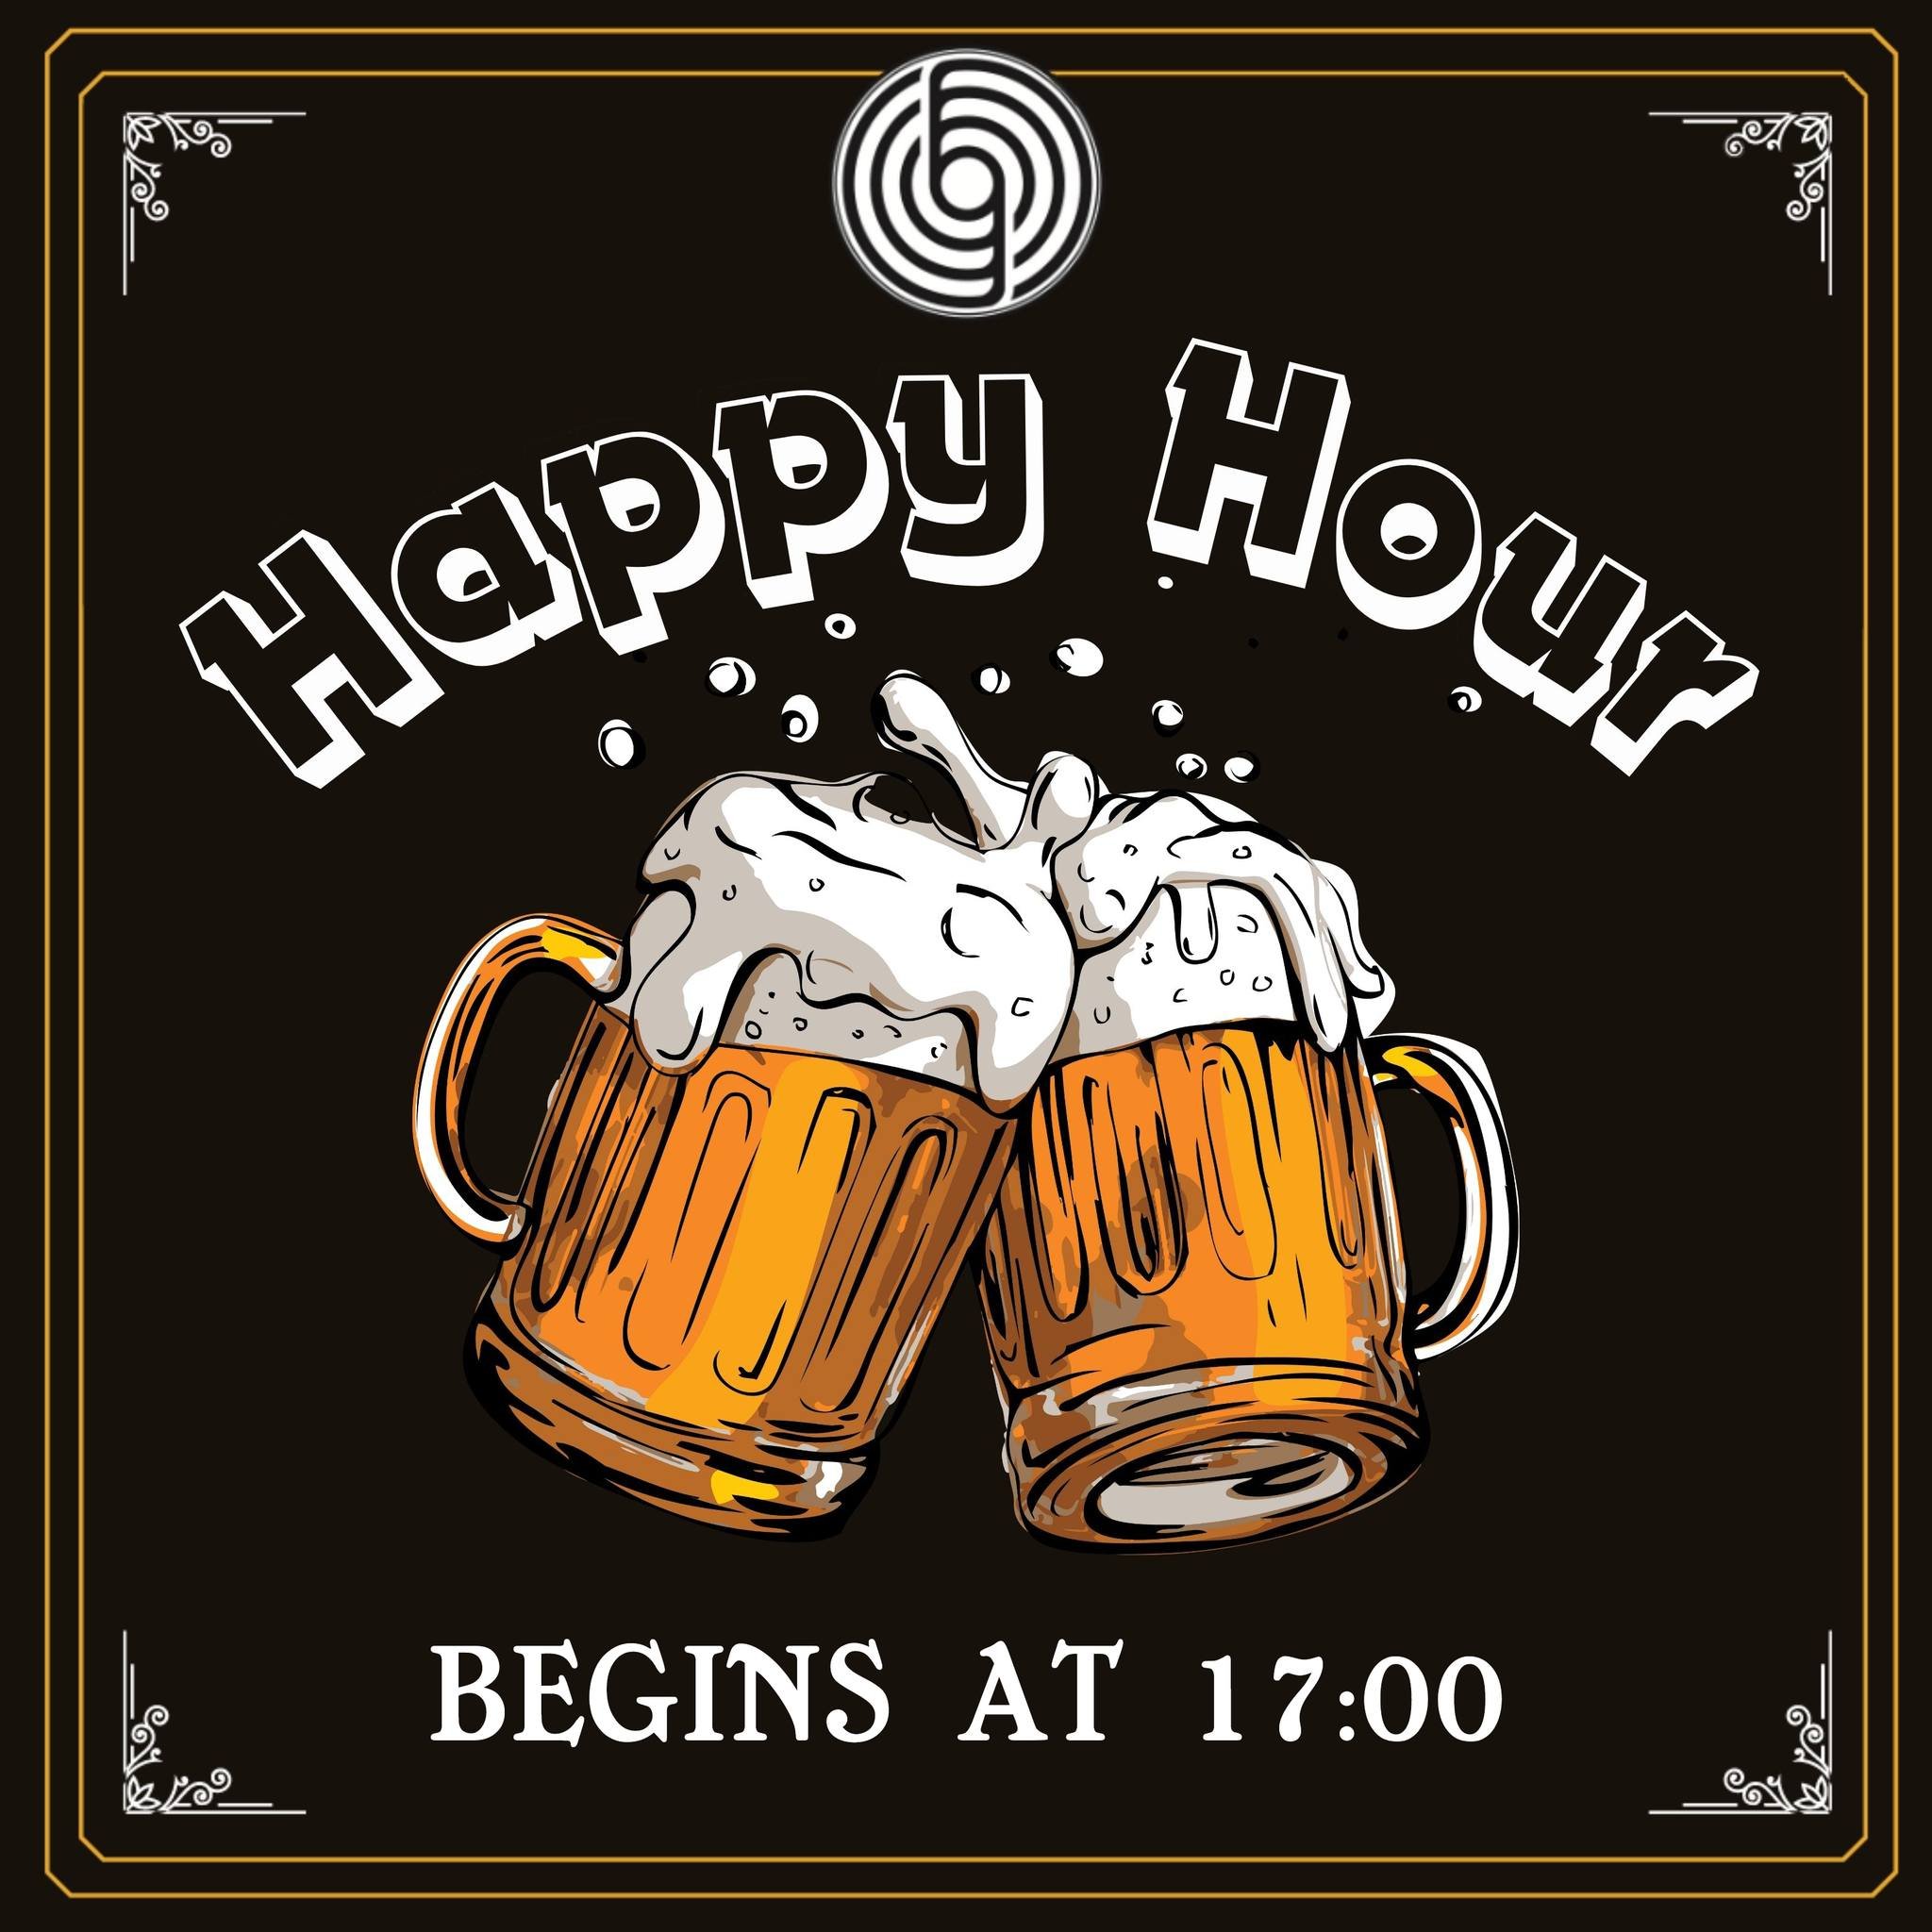 Heads up, party people! We'll be closing early today at 20:00 for a private event. Start your relaxing Sunday evening with our Happy Hour, beginning at 17:00 and running until the doors close.
.
.
.
.
 #earlyclose #happyhour #gaukurinn